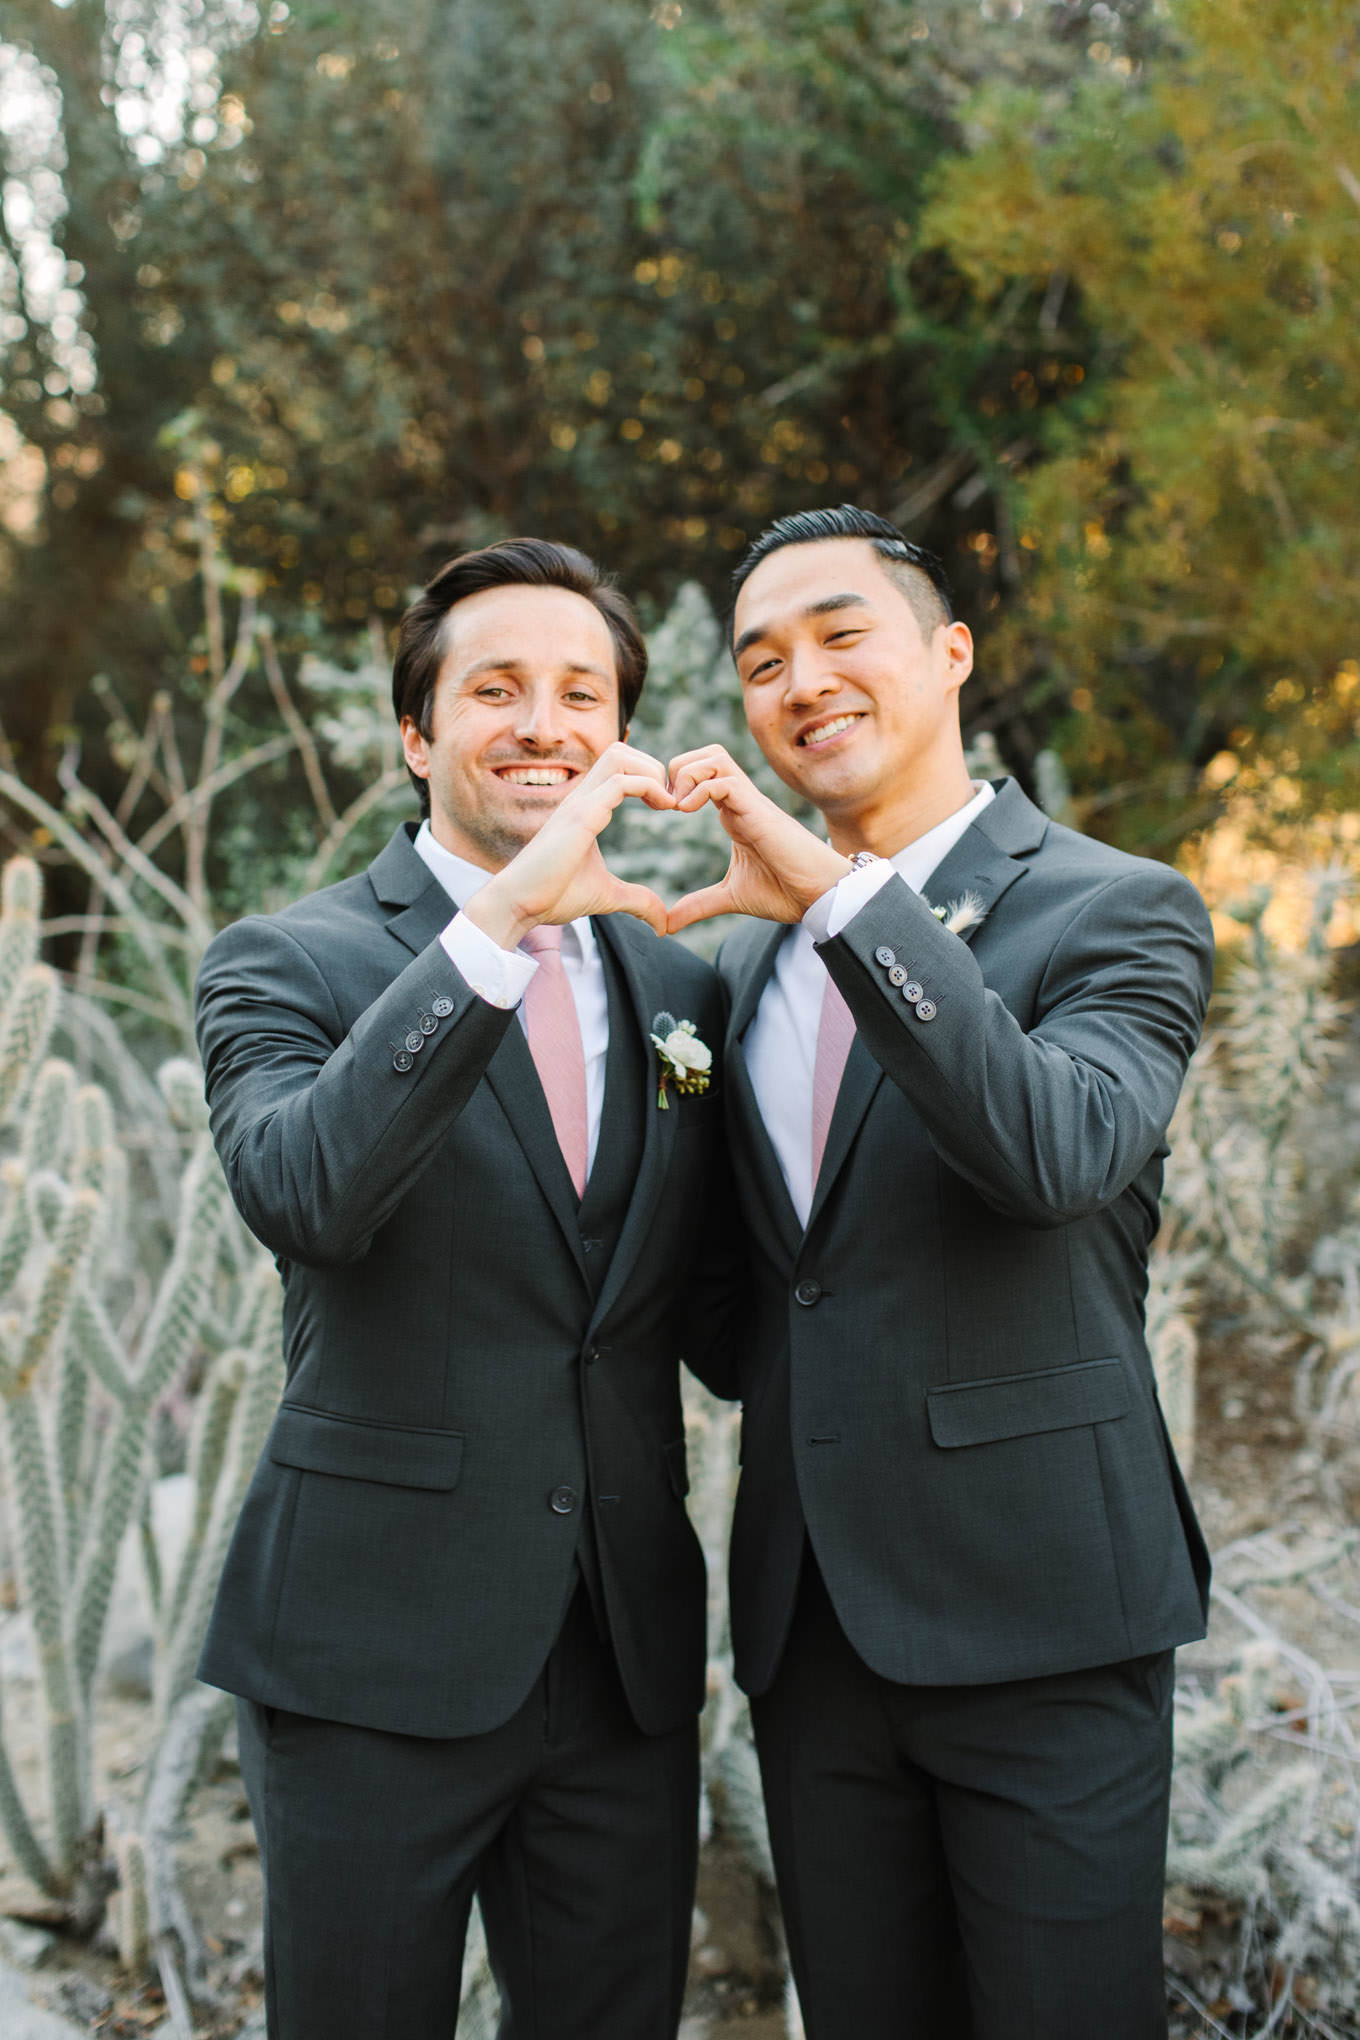 Groom and groomsman fun portrait | Living Desert Zoo & Gardens wedding with unique details | Elevated and colorful wedding photography for fun-loving couples in Southern California |  #PalmSprings #palmspringsphotographer #gardenwedding #palmspringswedding  Source: Mary Costa Photography | Los Angeles wedding photographer 